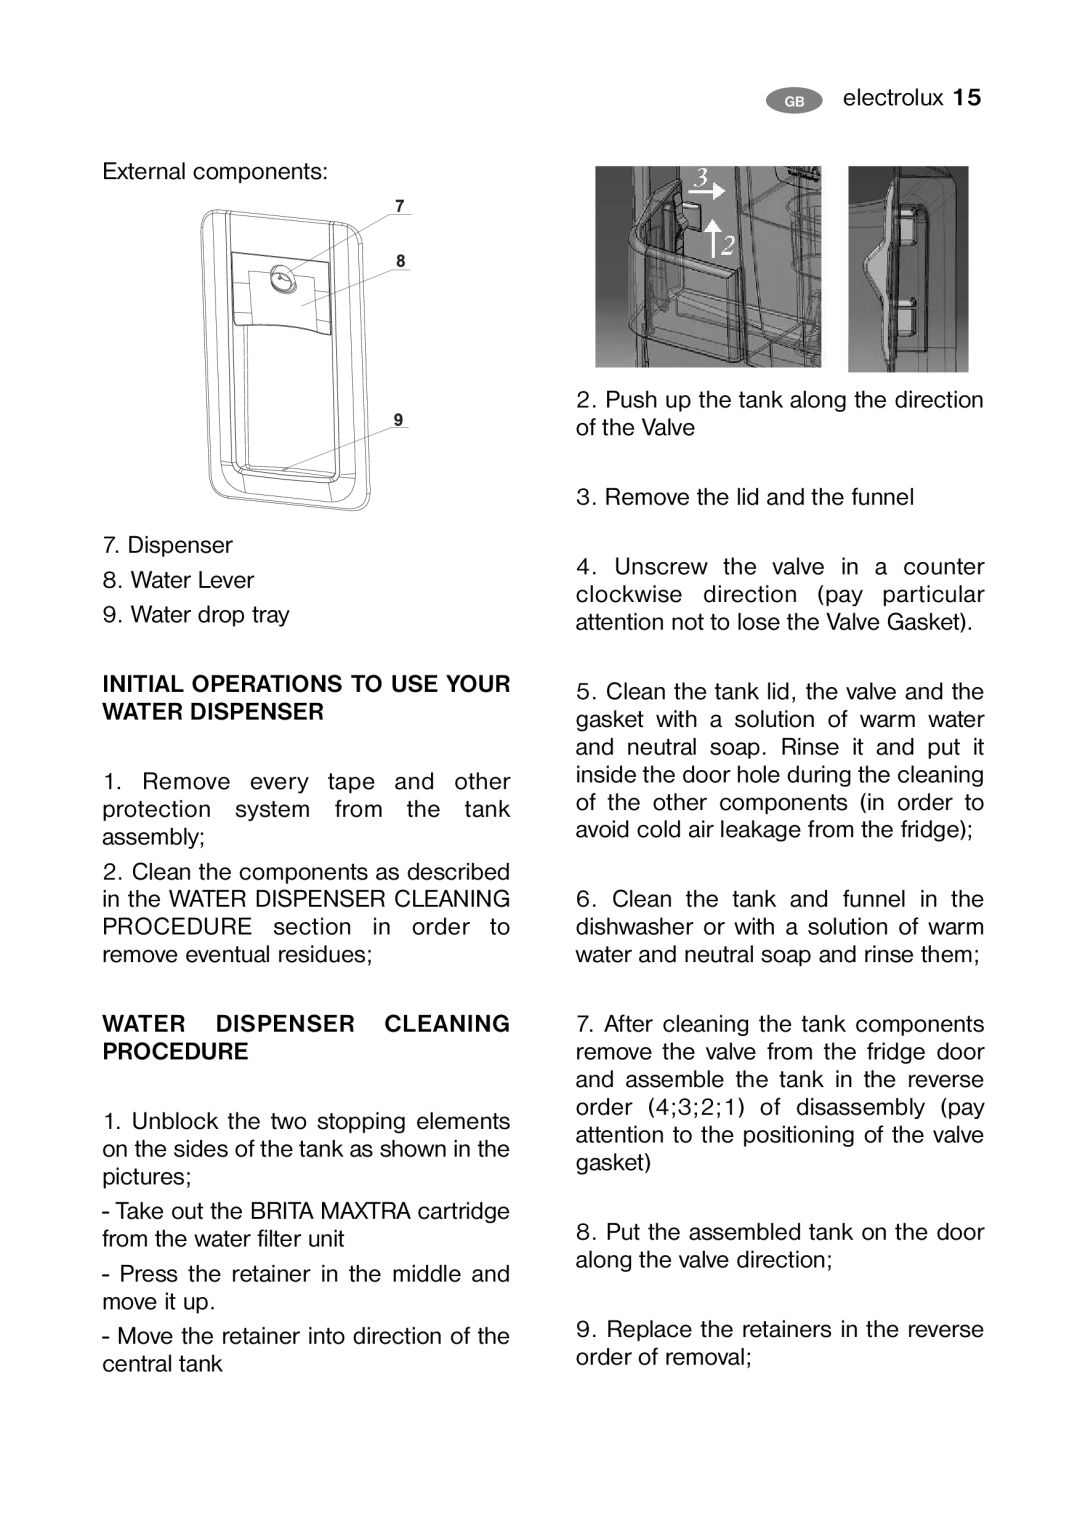 Electrolux ENB 40405 W, ENB 40405 S Initial Operations To Use Your Water Dispenser, Water Dispenser Cleaning Procedure 